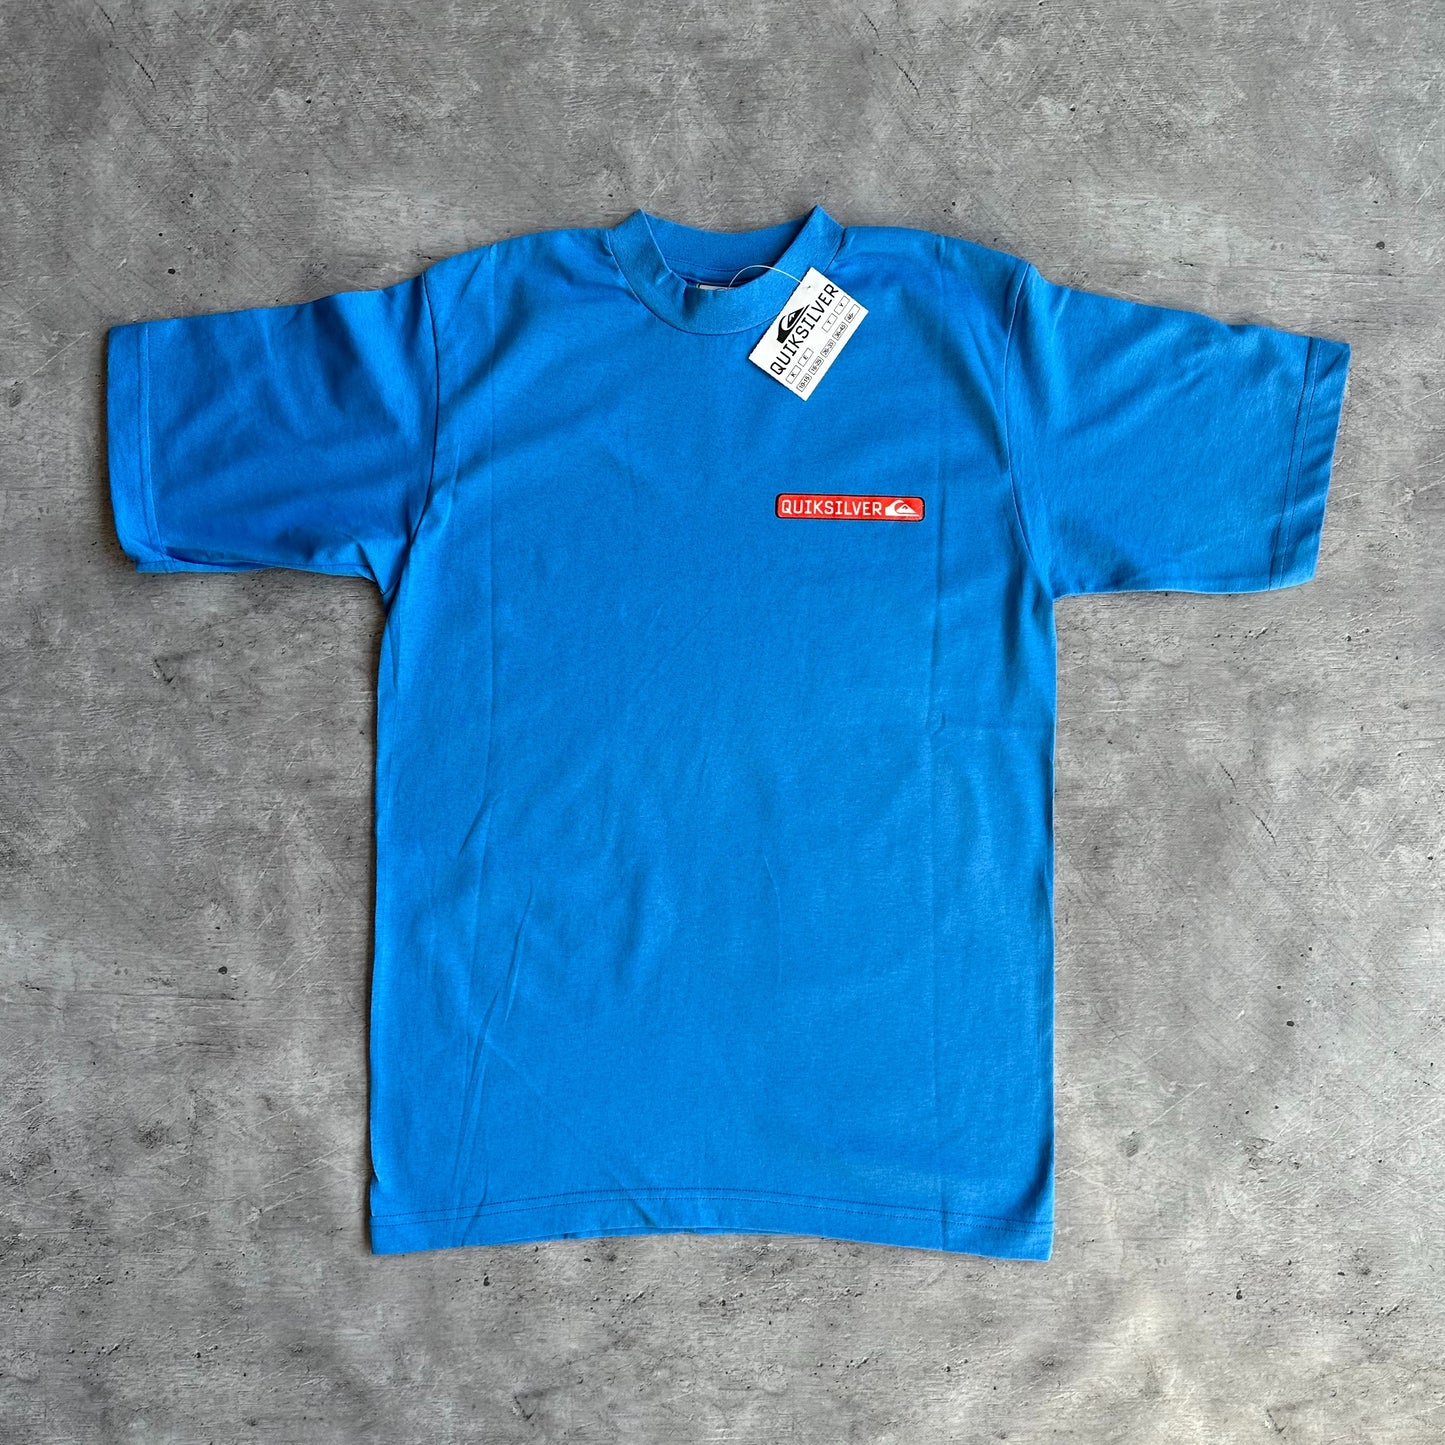 Vintage Quiksilver Tee *DEAD STOCK WITH TAGS*